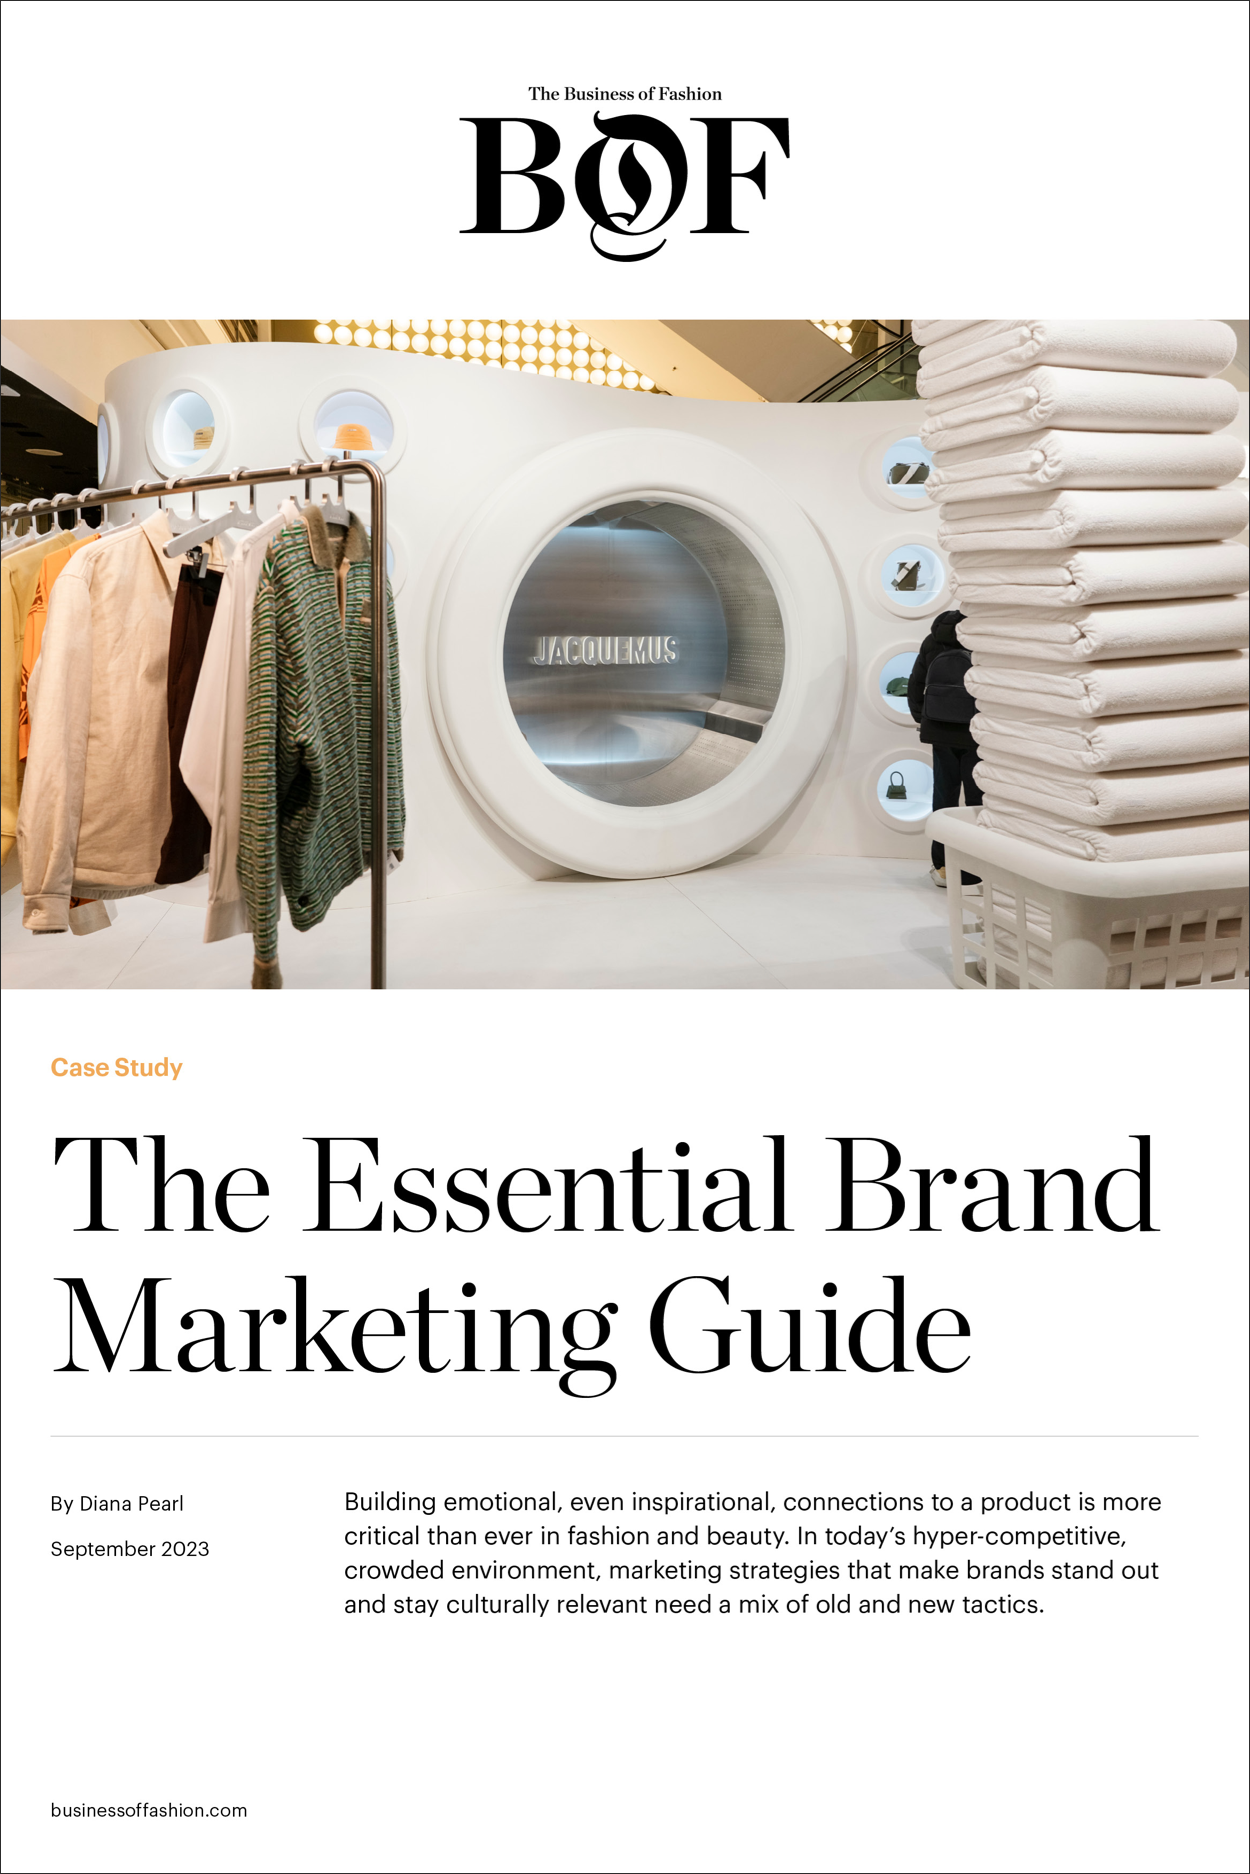 Do Fashion Brands Sell Experience? Understanding the Role of Branding and  Marketing